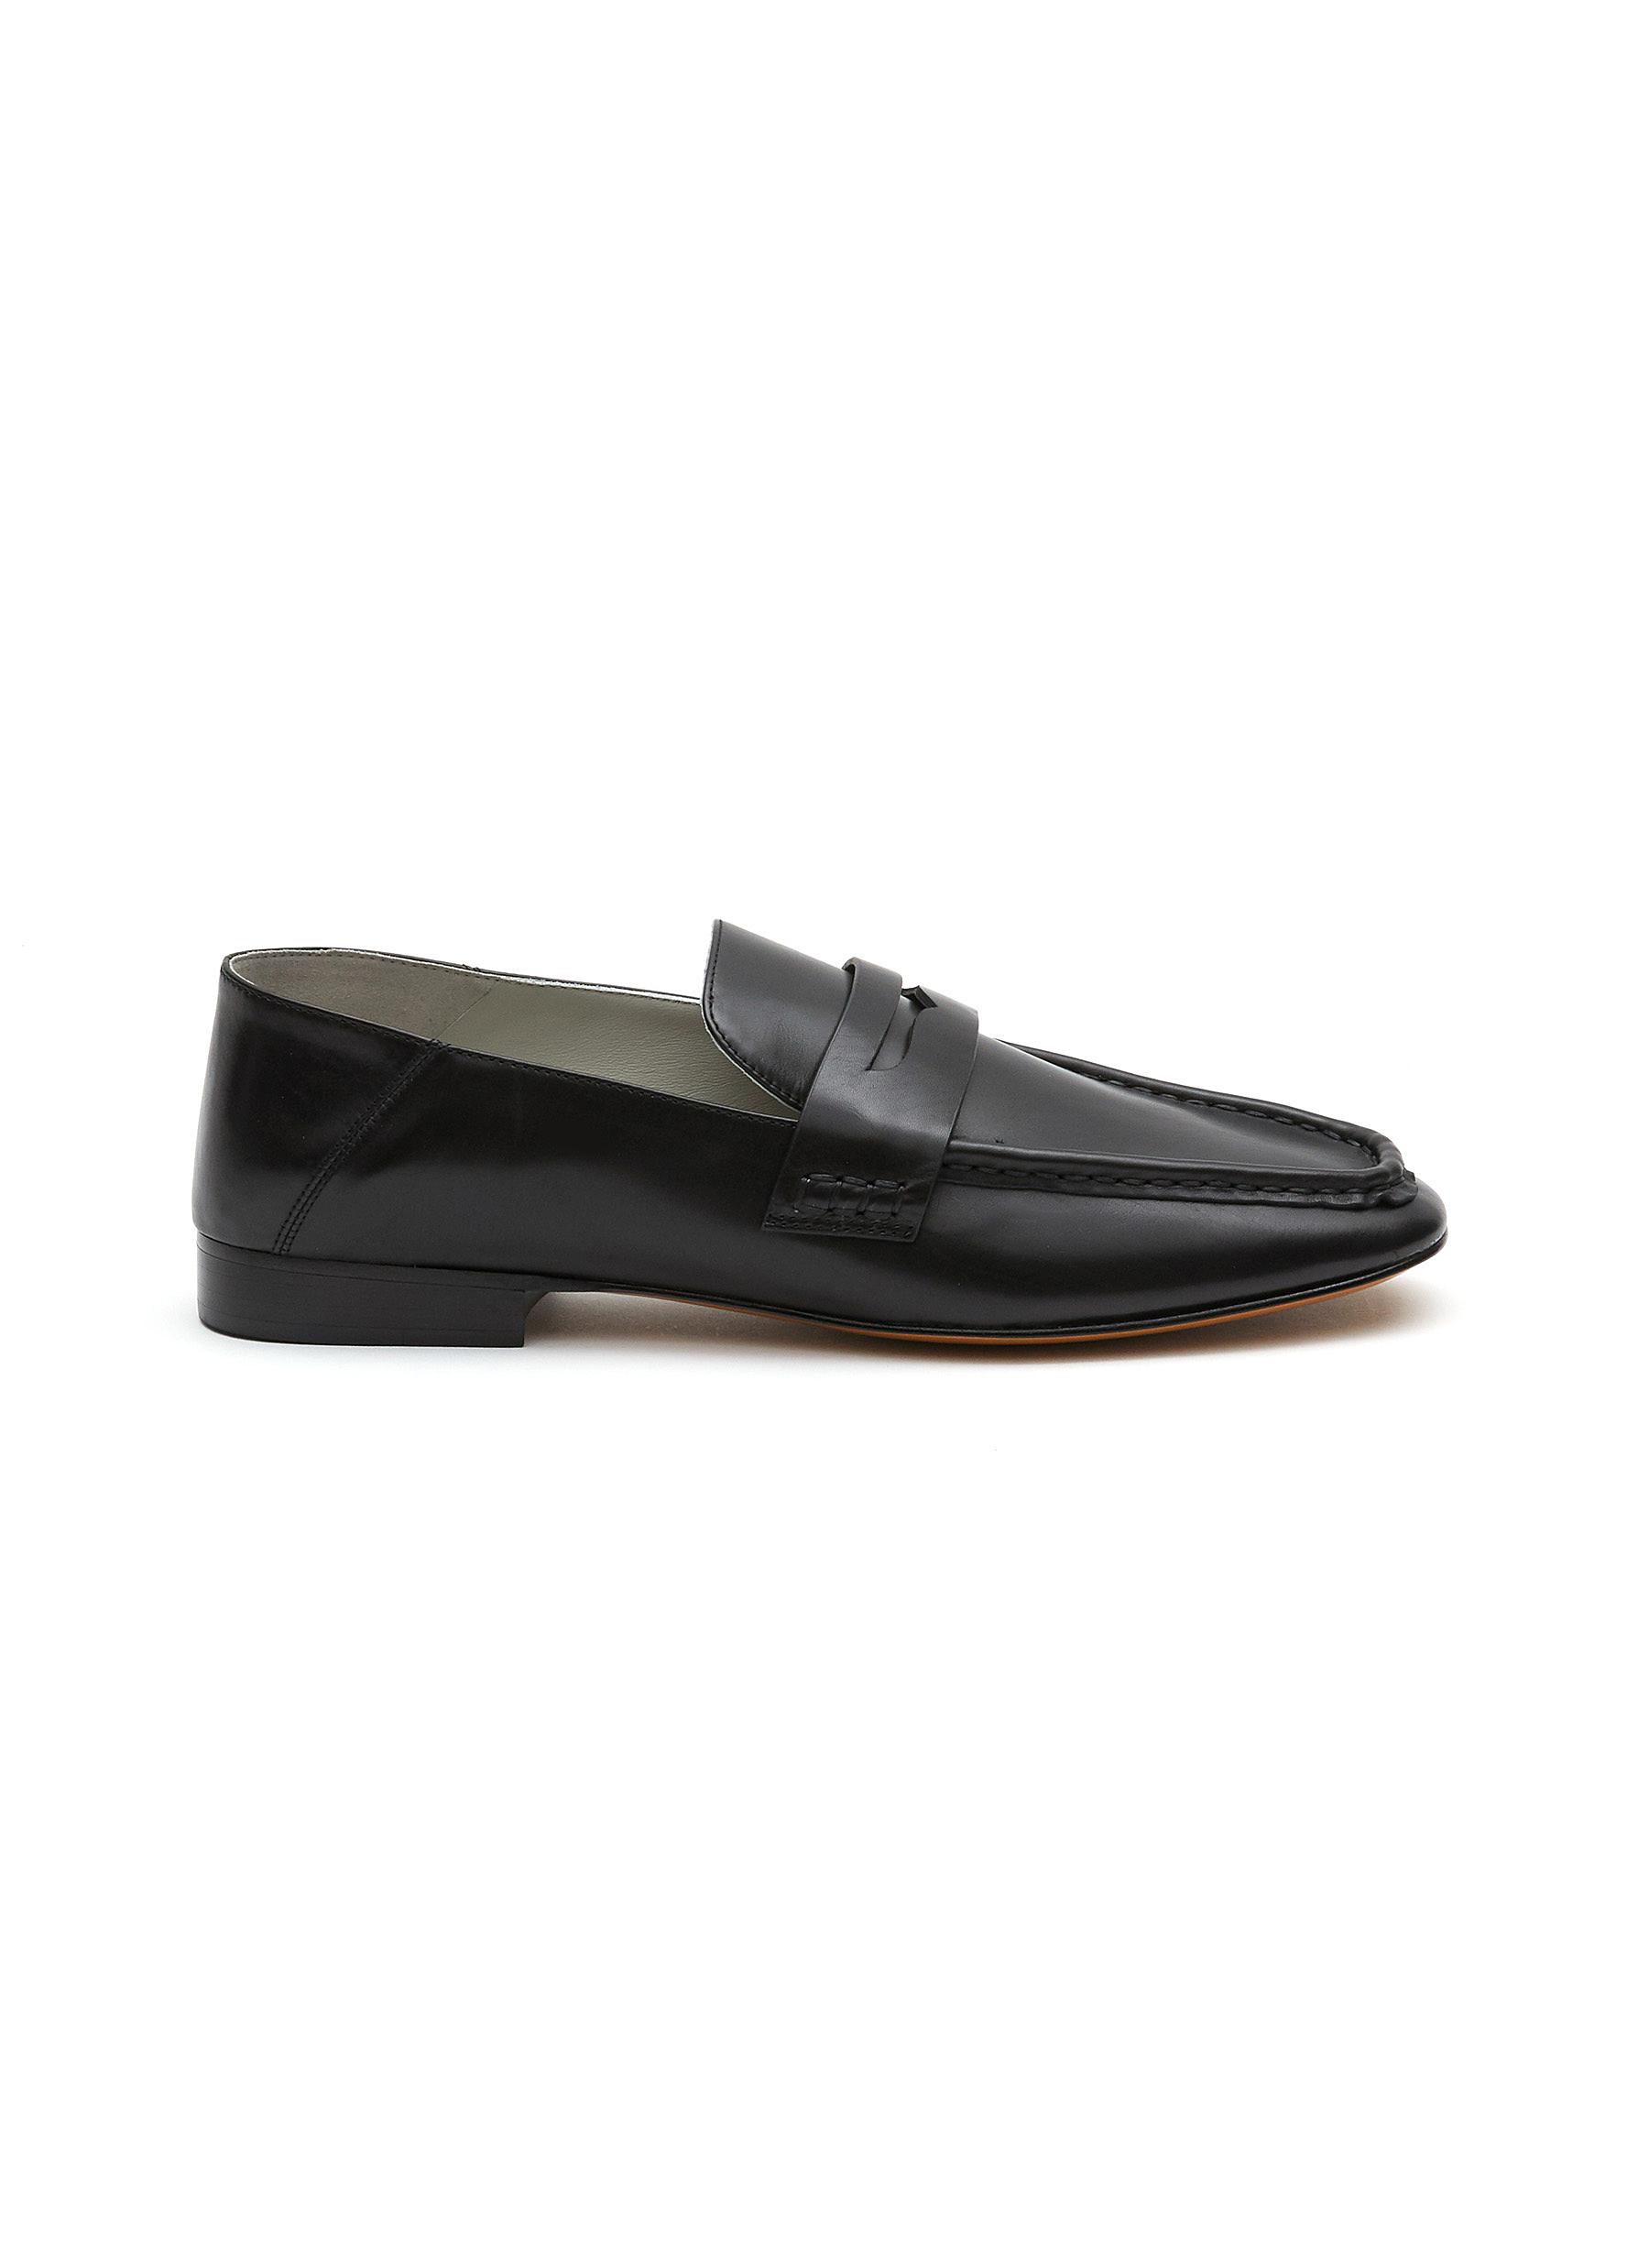 â€˜LONDON’ FLAT SQUARE TOE LEATHER PENNY LOAFERS